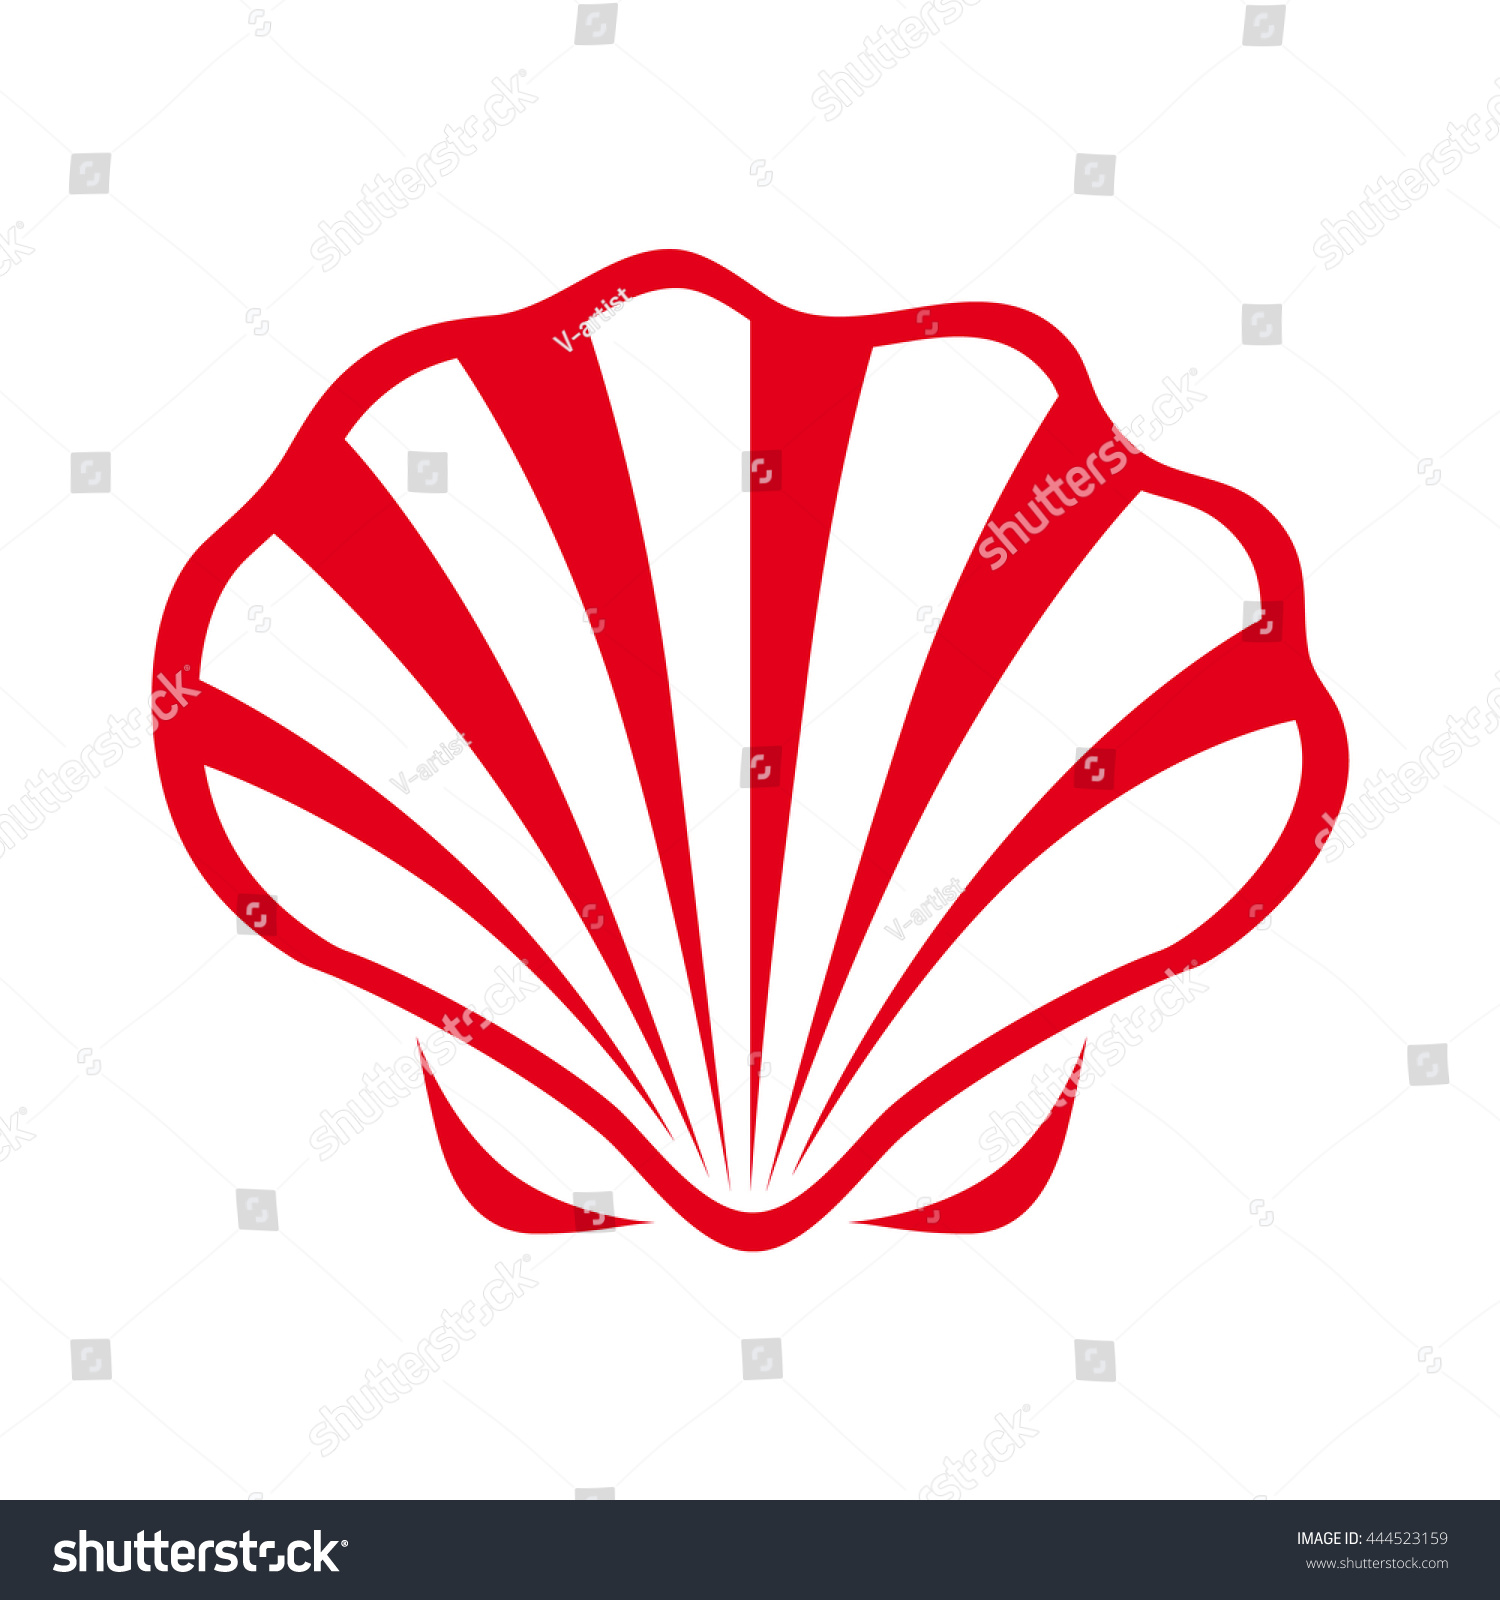 Silhouette Sea Shell Isolated On White Stock Vector 444523159 - Shutterstock